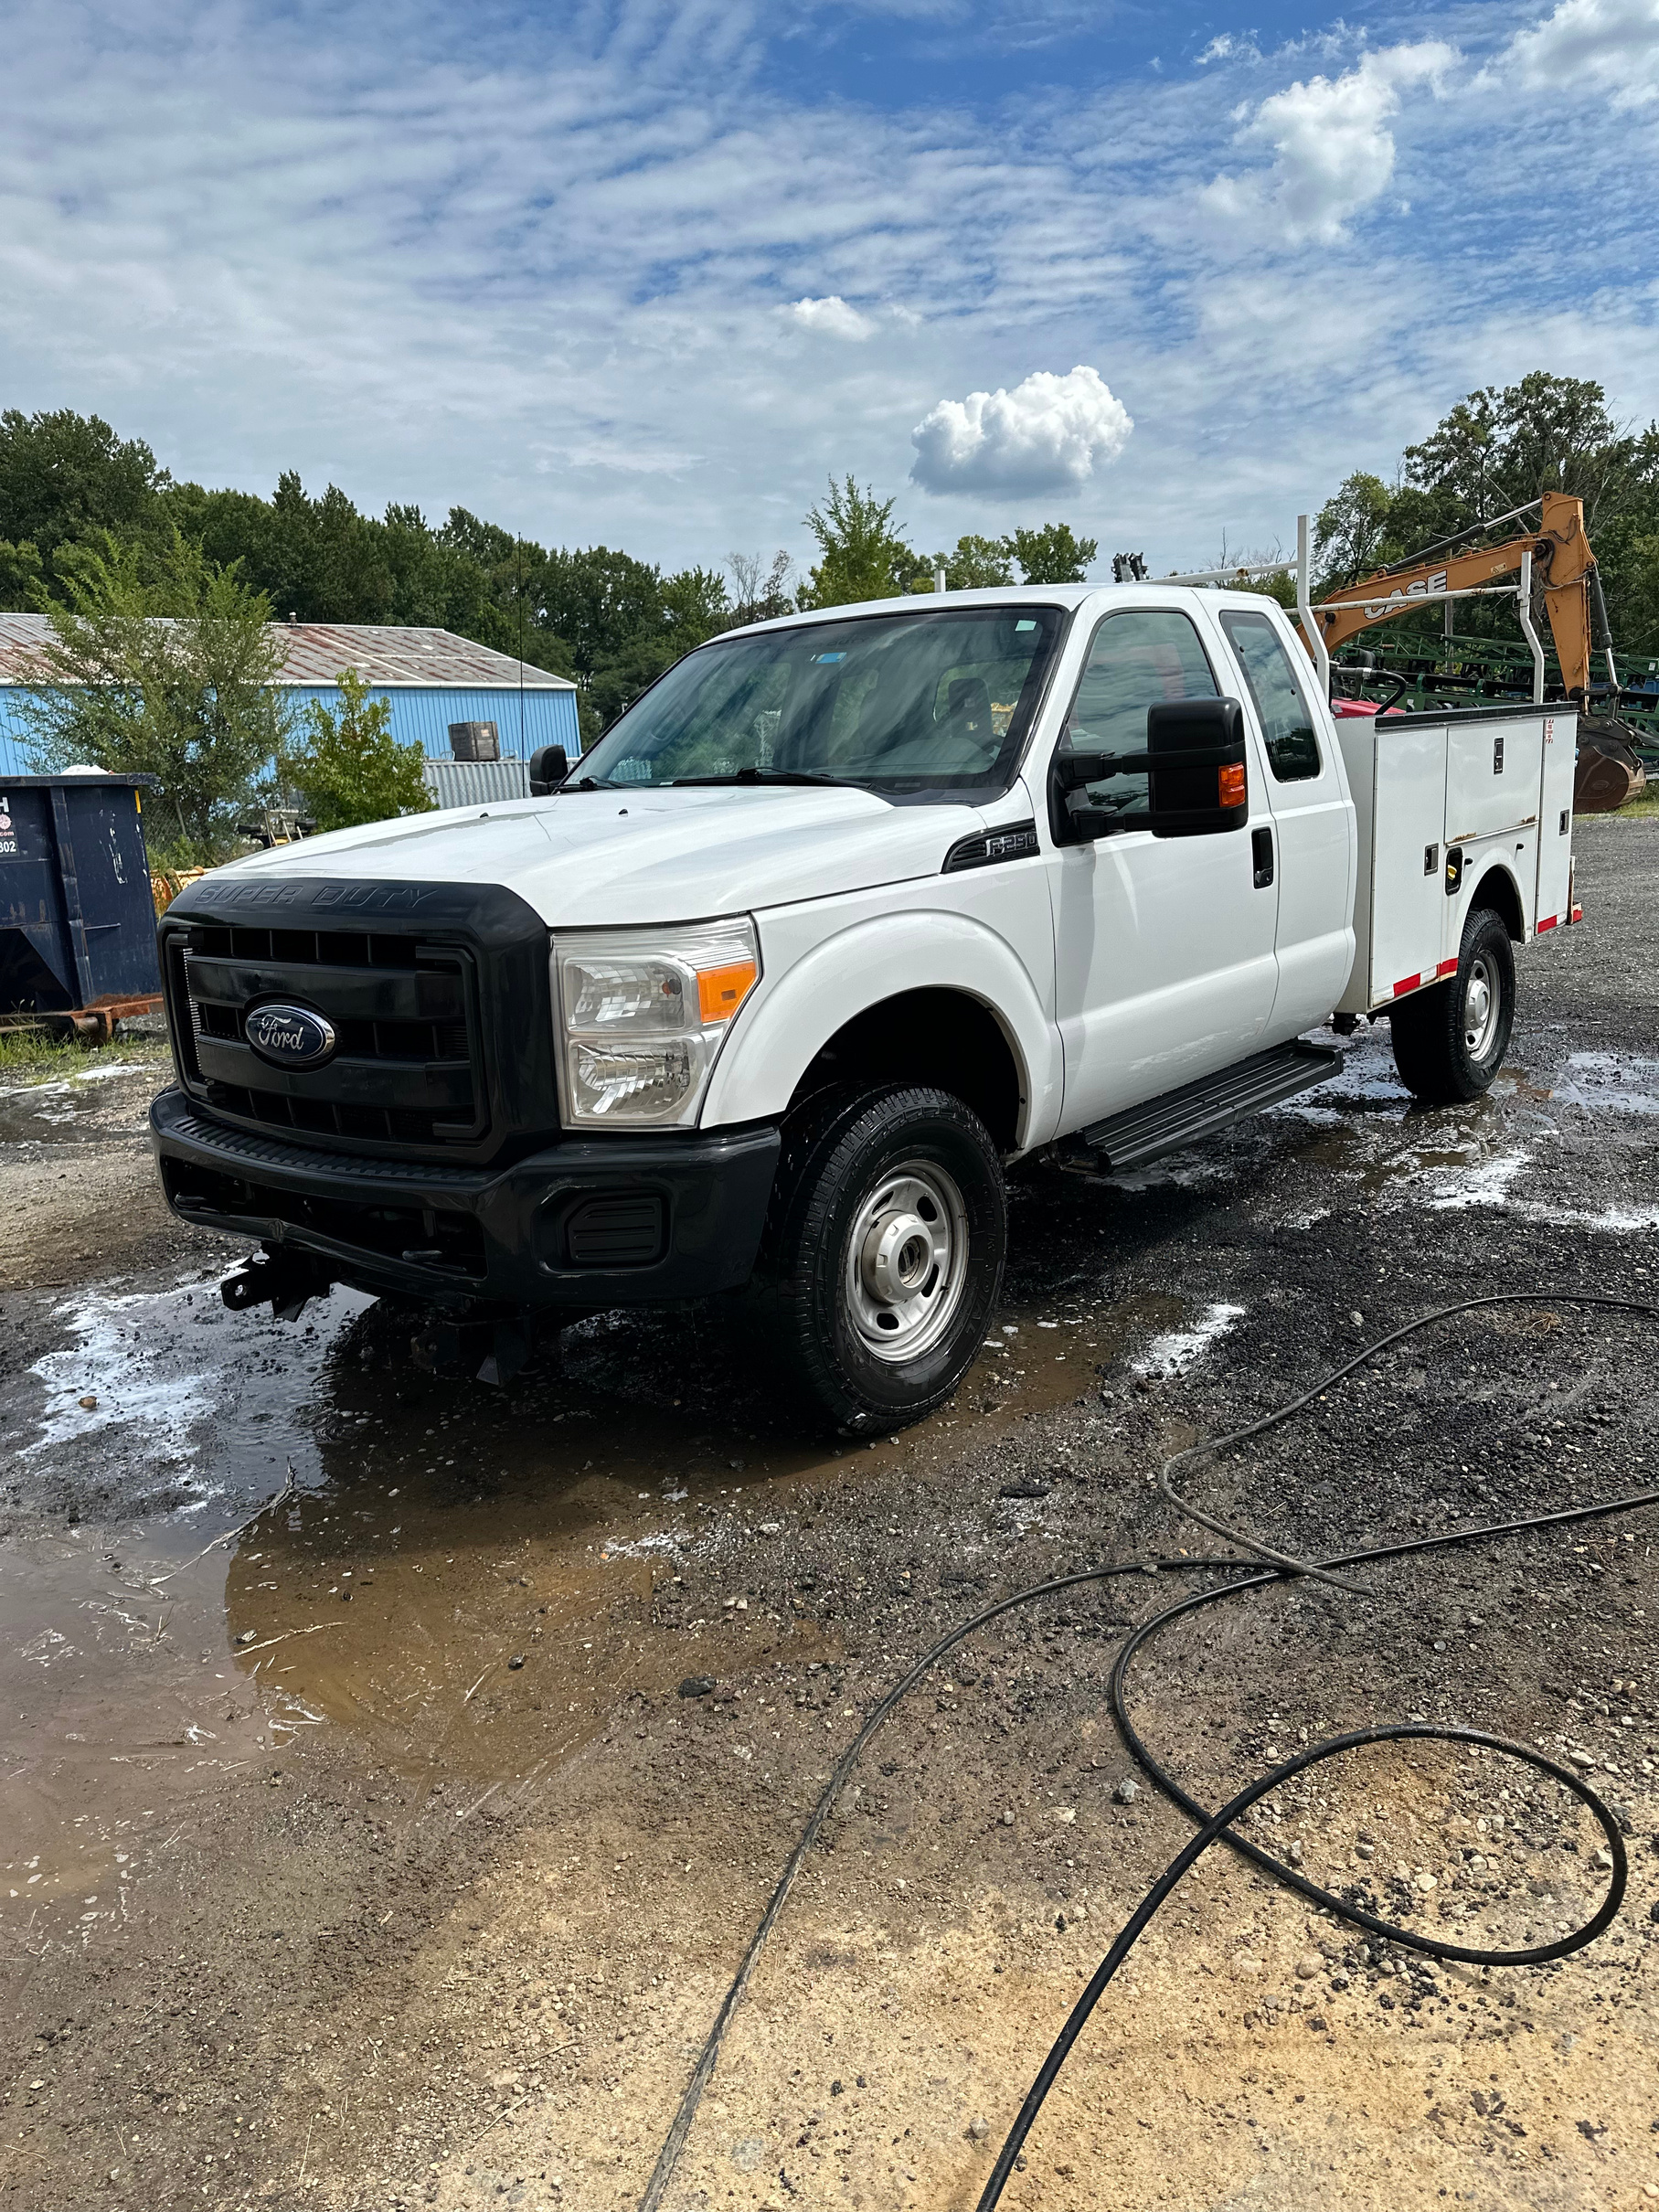 This Ford F-250 received a basic exterior and interior detail.